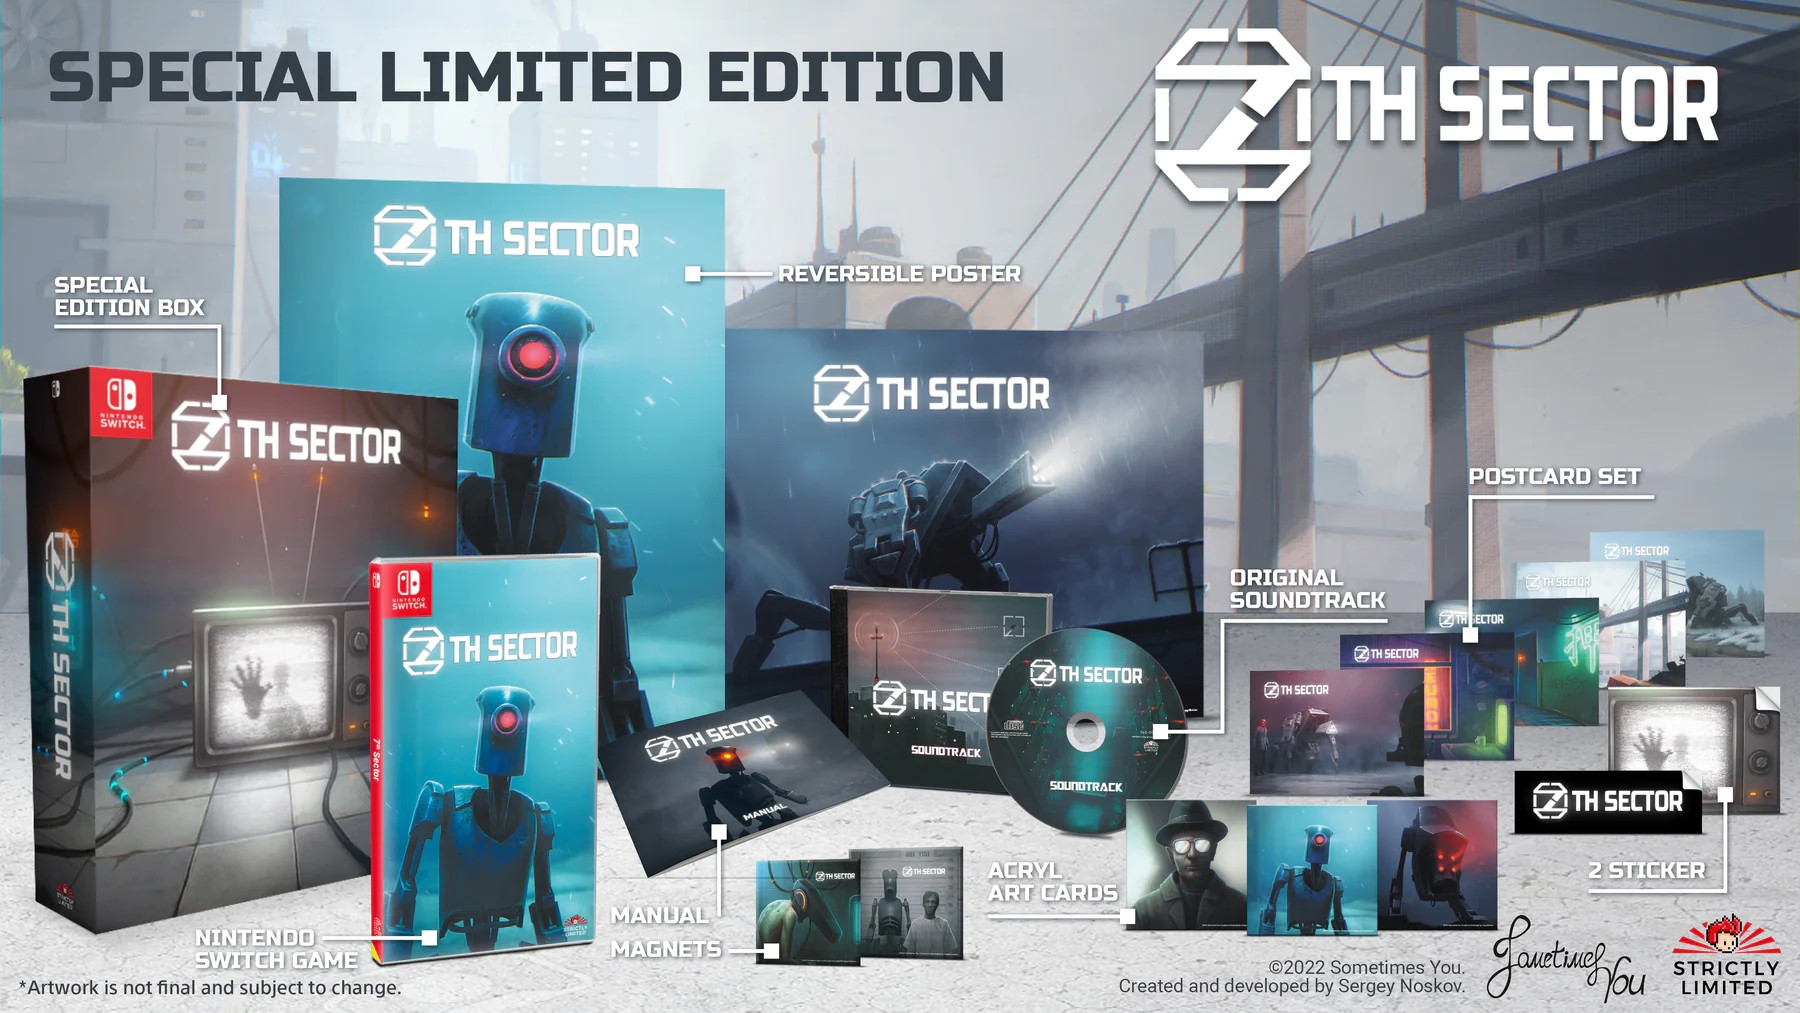 7th Sector Special Limited Edition - Nintendo Switch